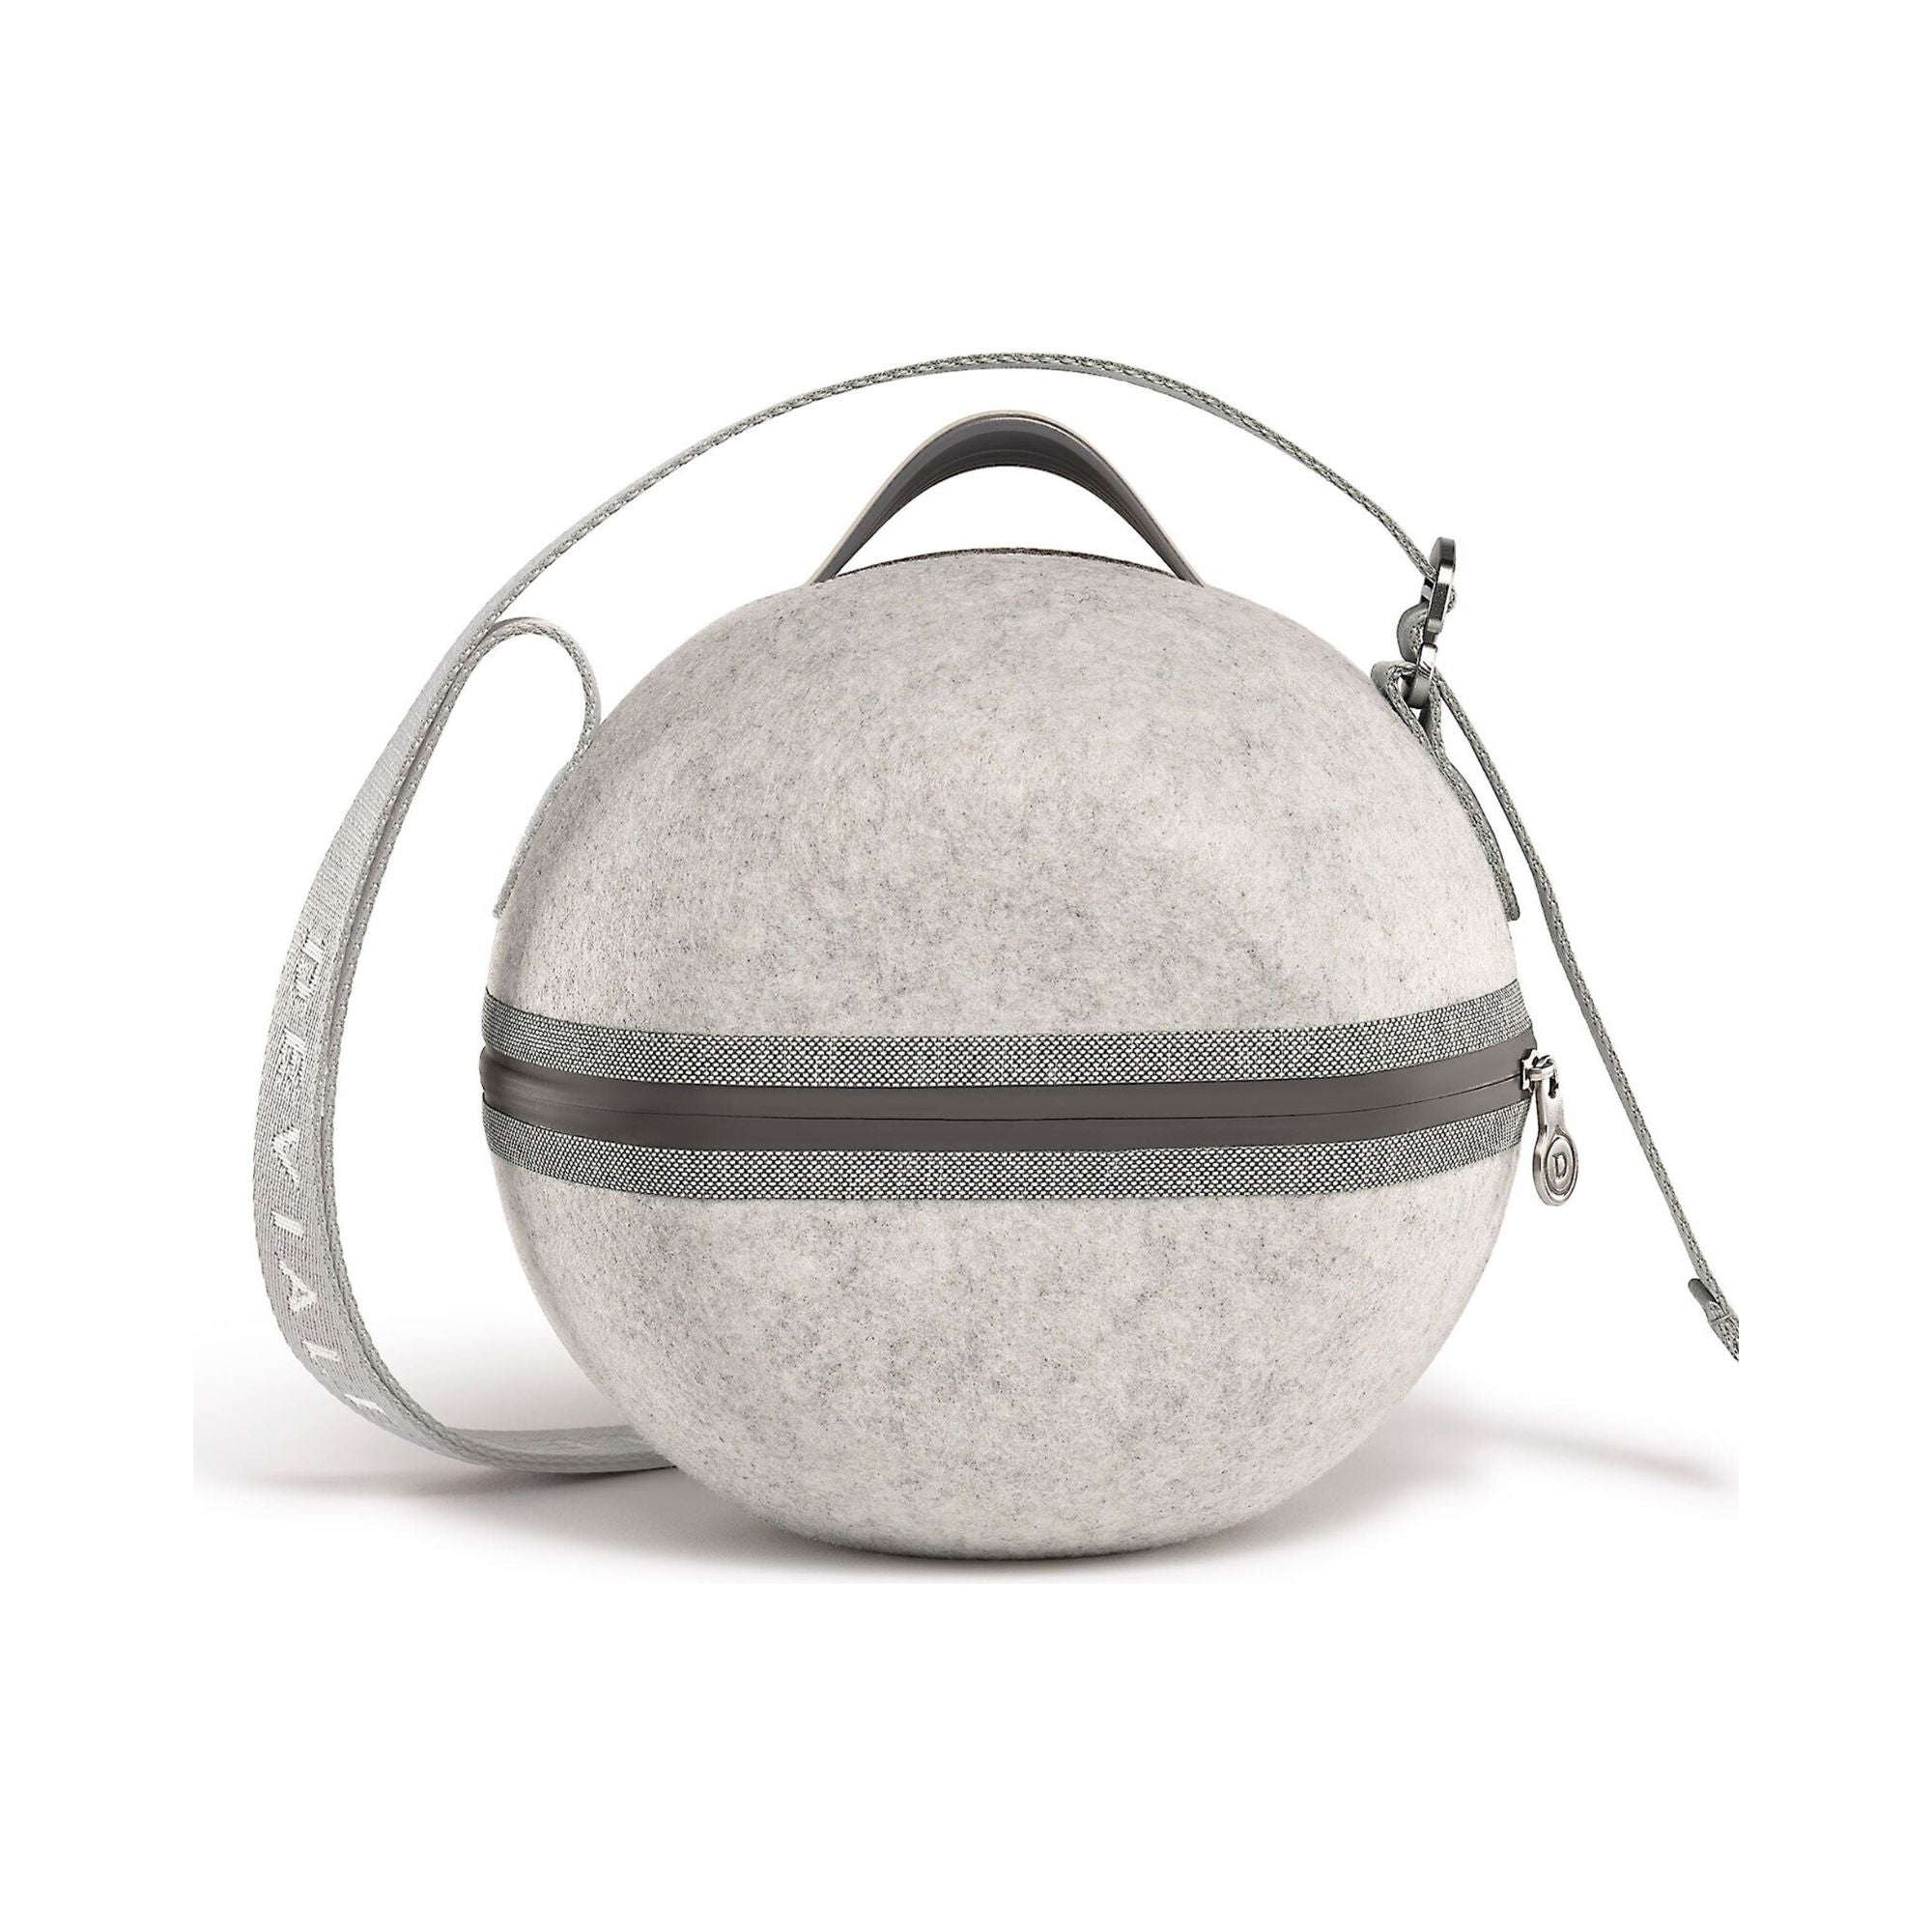 Devialet Mania Cocoon - Carrying Case, Devialet, carring bag - AVStore.in